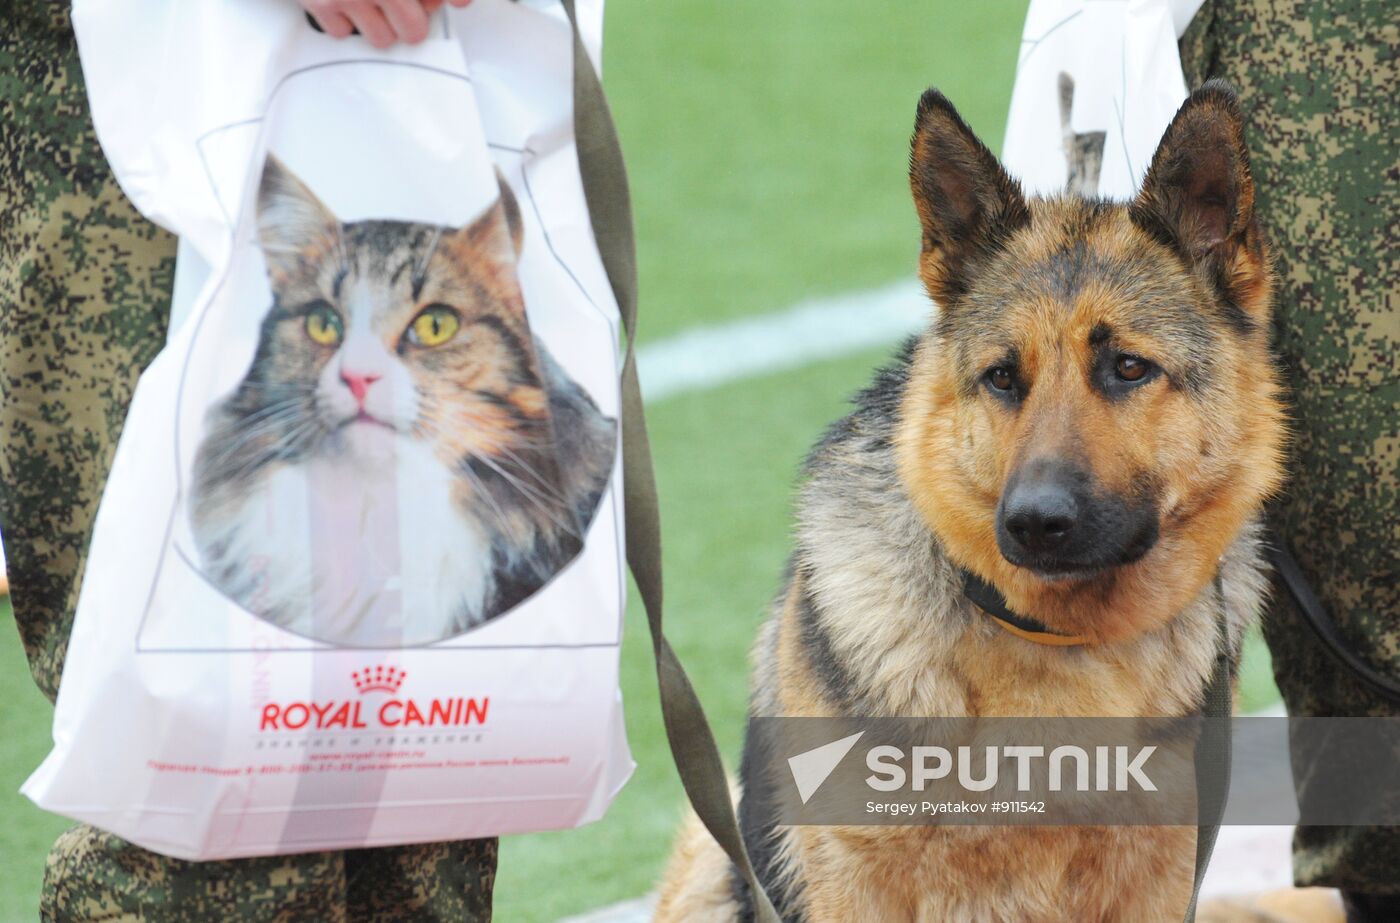 Professional Canine Championship of Russian customs authorities